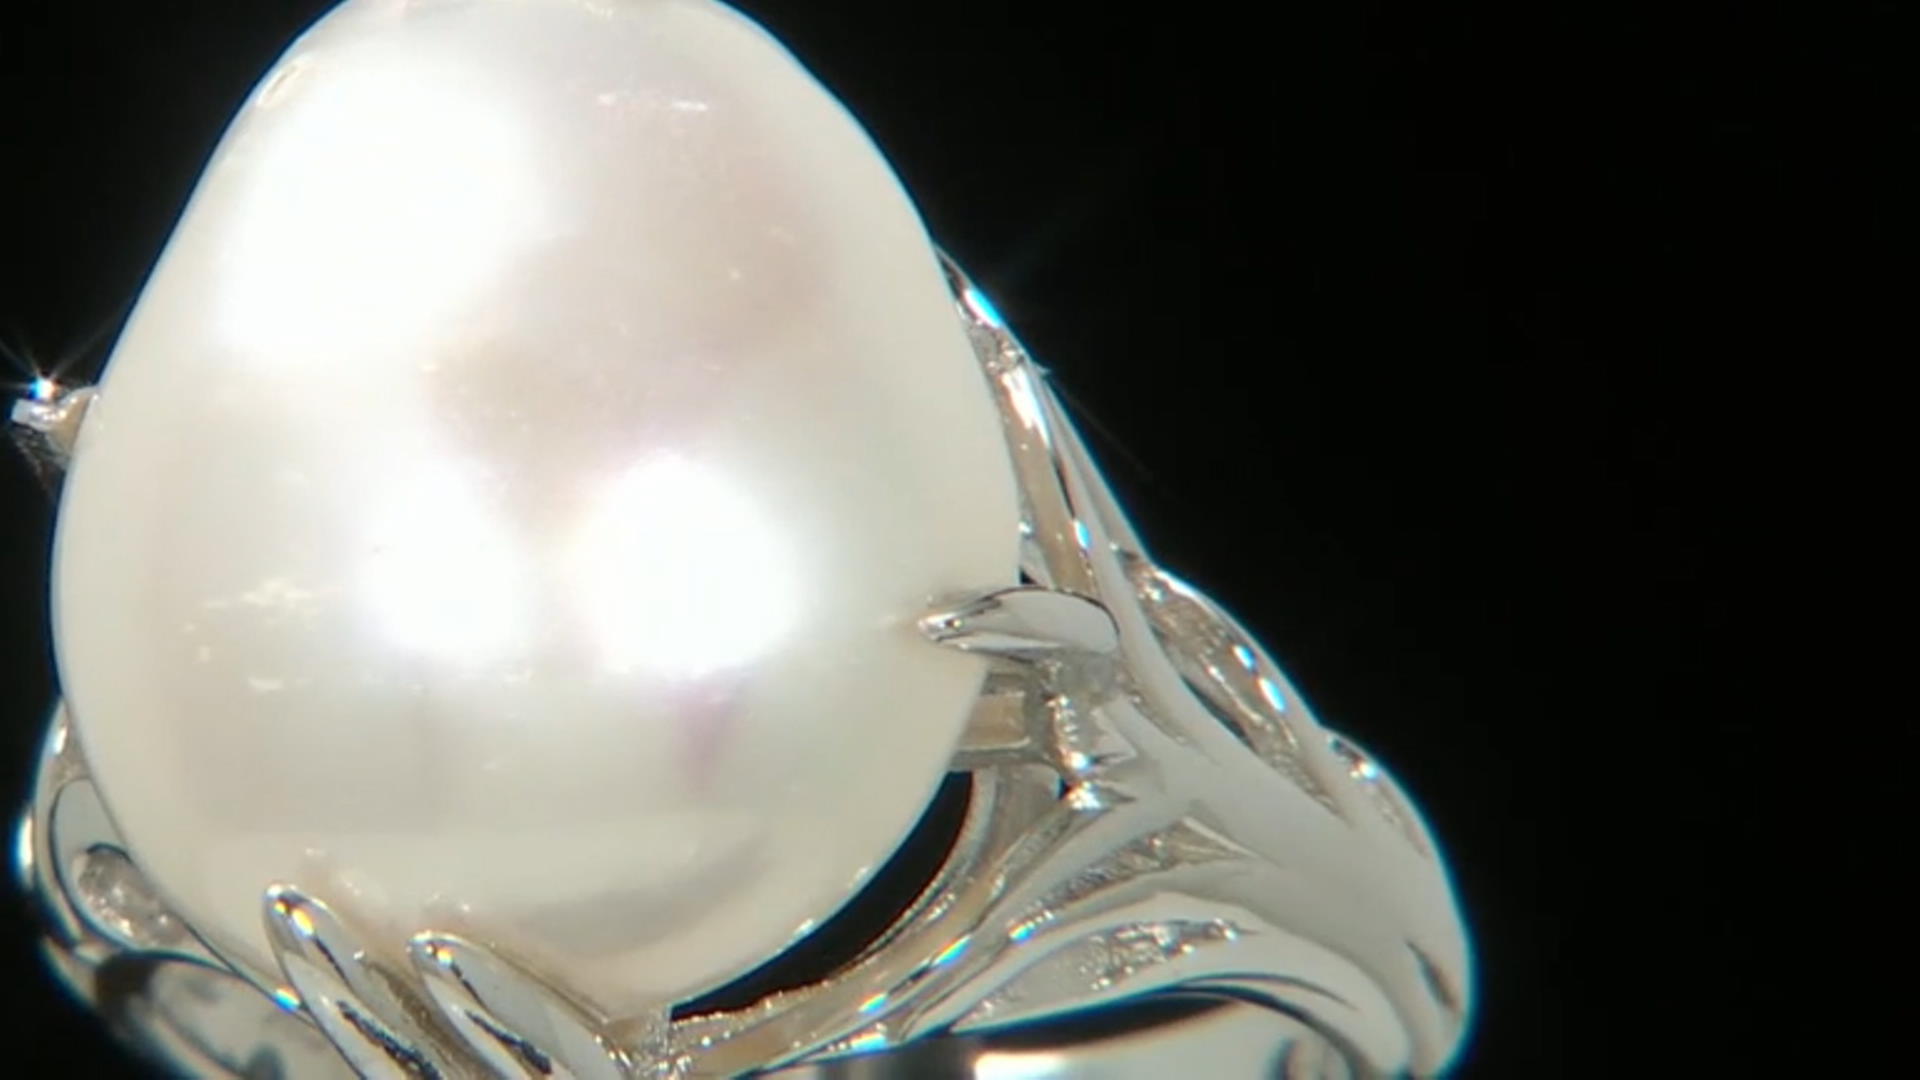 White Cultured Freshwater Pearl Rhodium Over Sterling Silver Ring Video Thumbnail